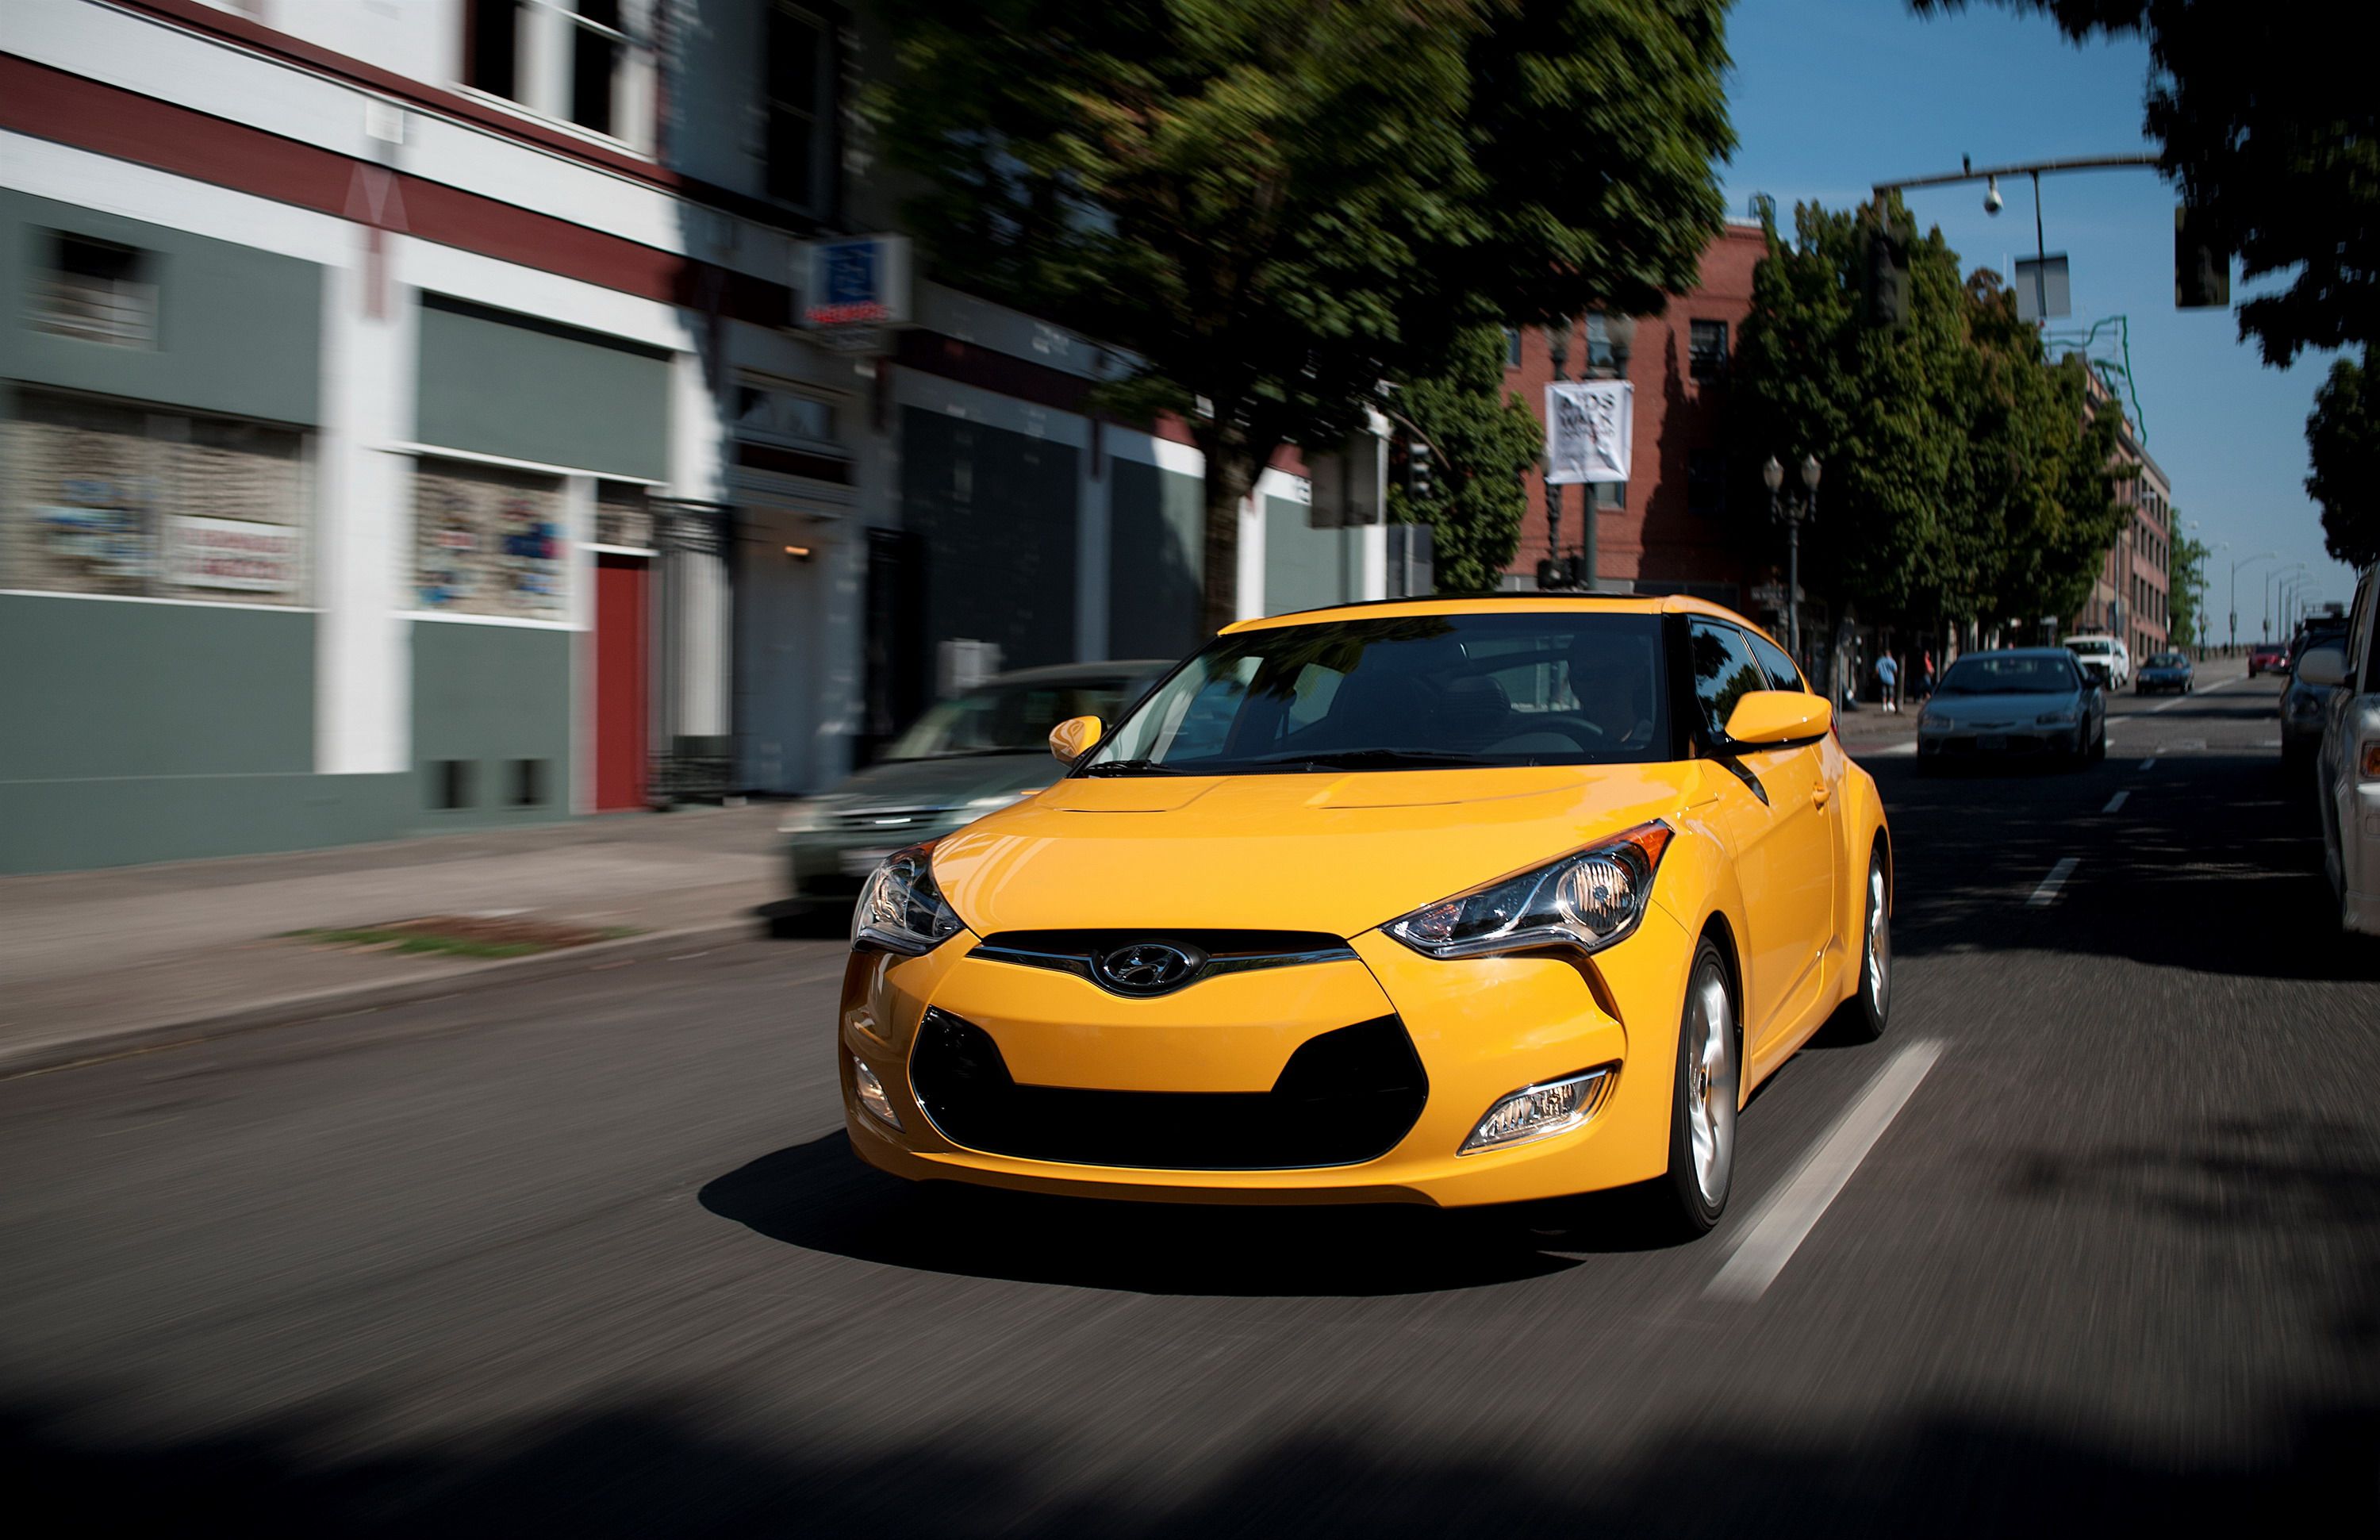 2014 Hyundai Veloster Could be Discontinued Before the Second-Generation Model Arrives